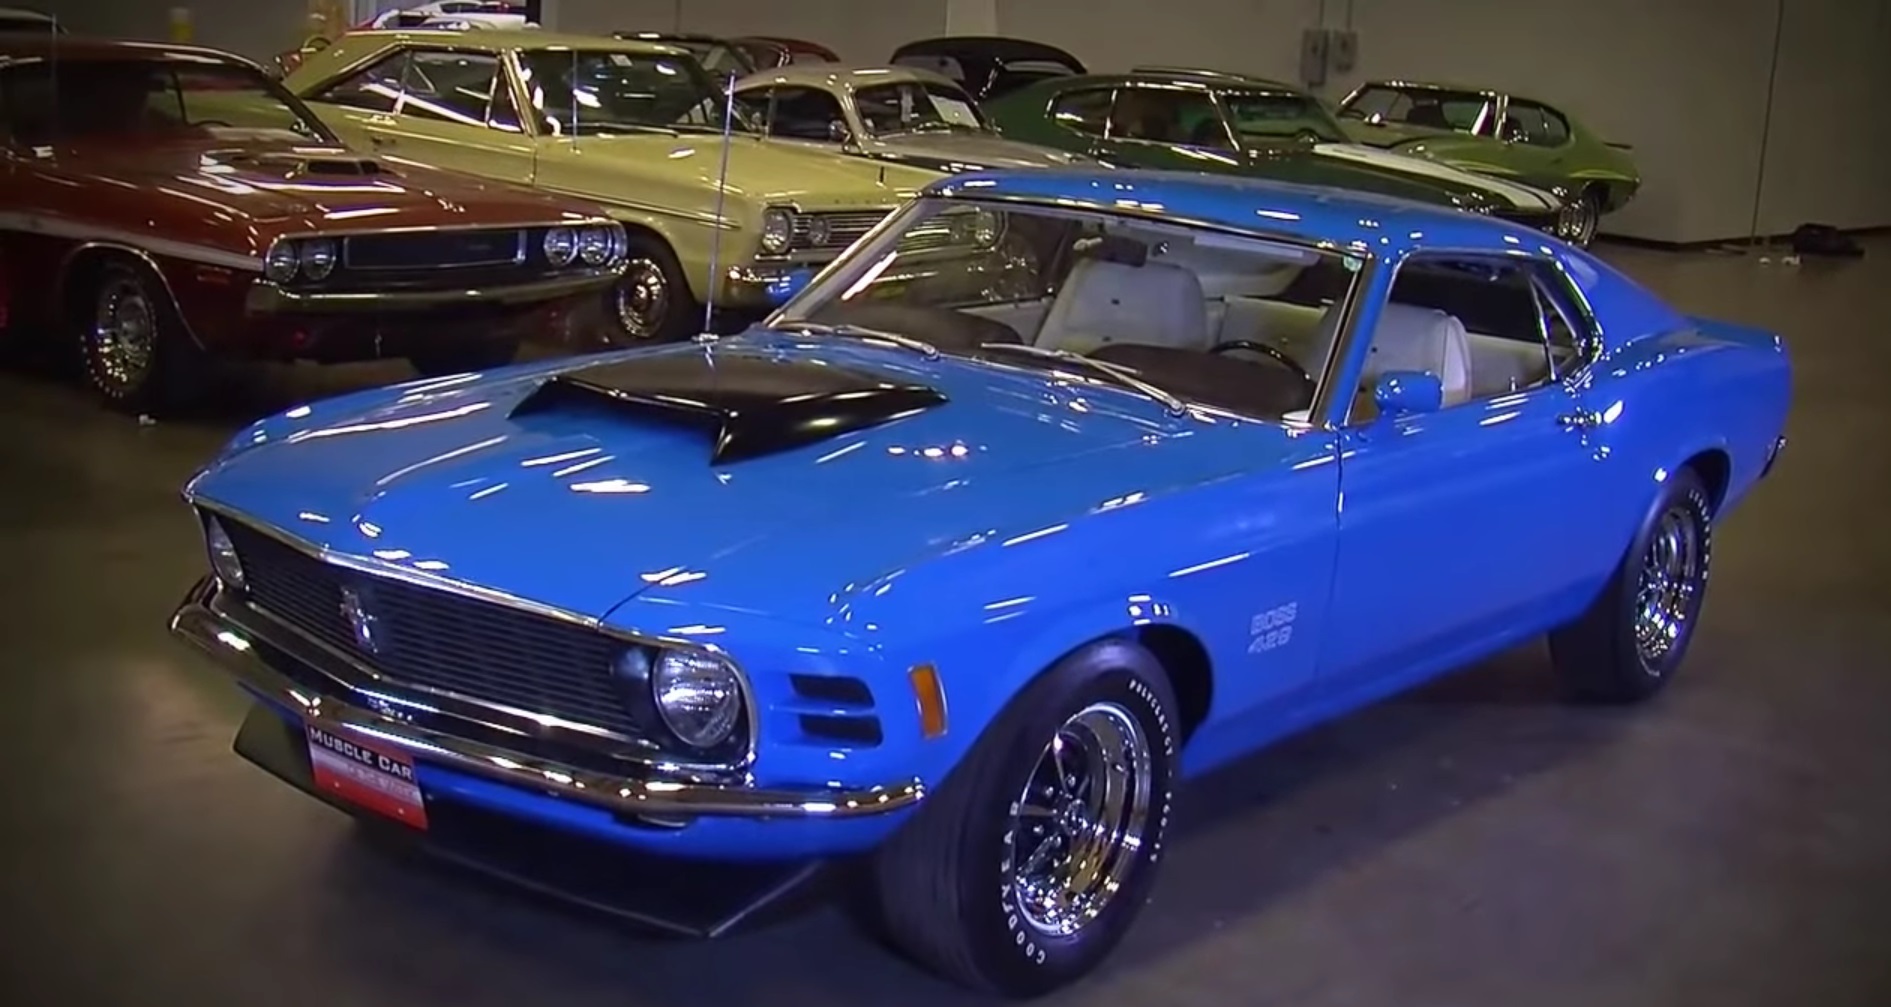 Video: 1970 Ford Mustang Boss 429 Muscle Car